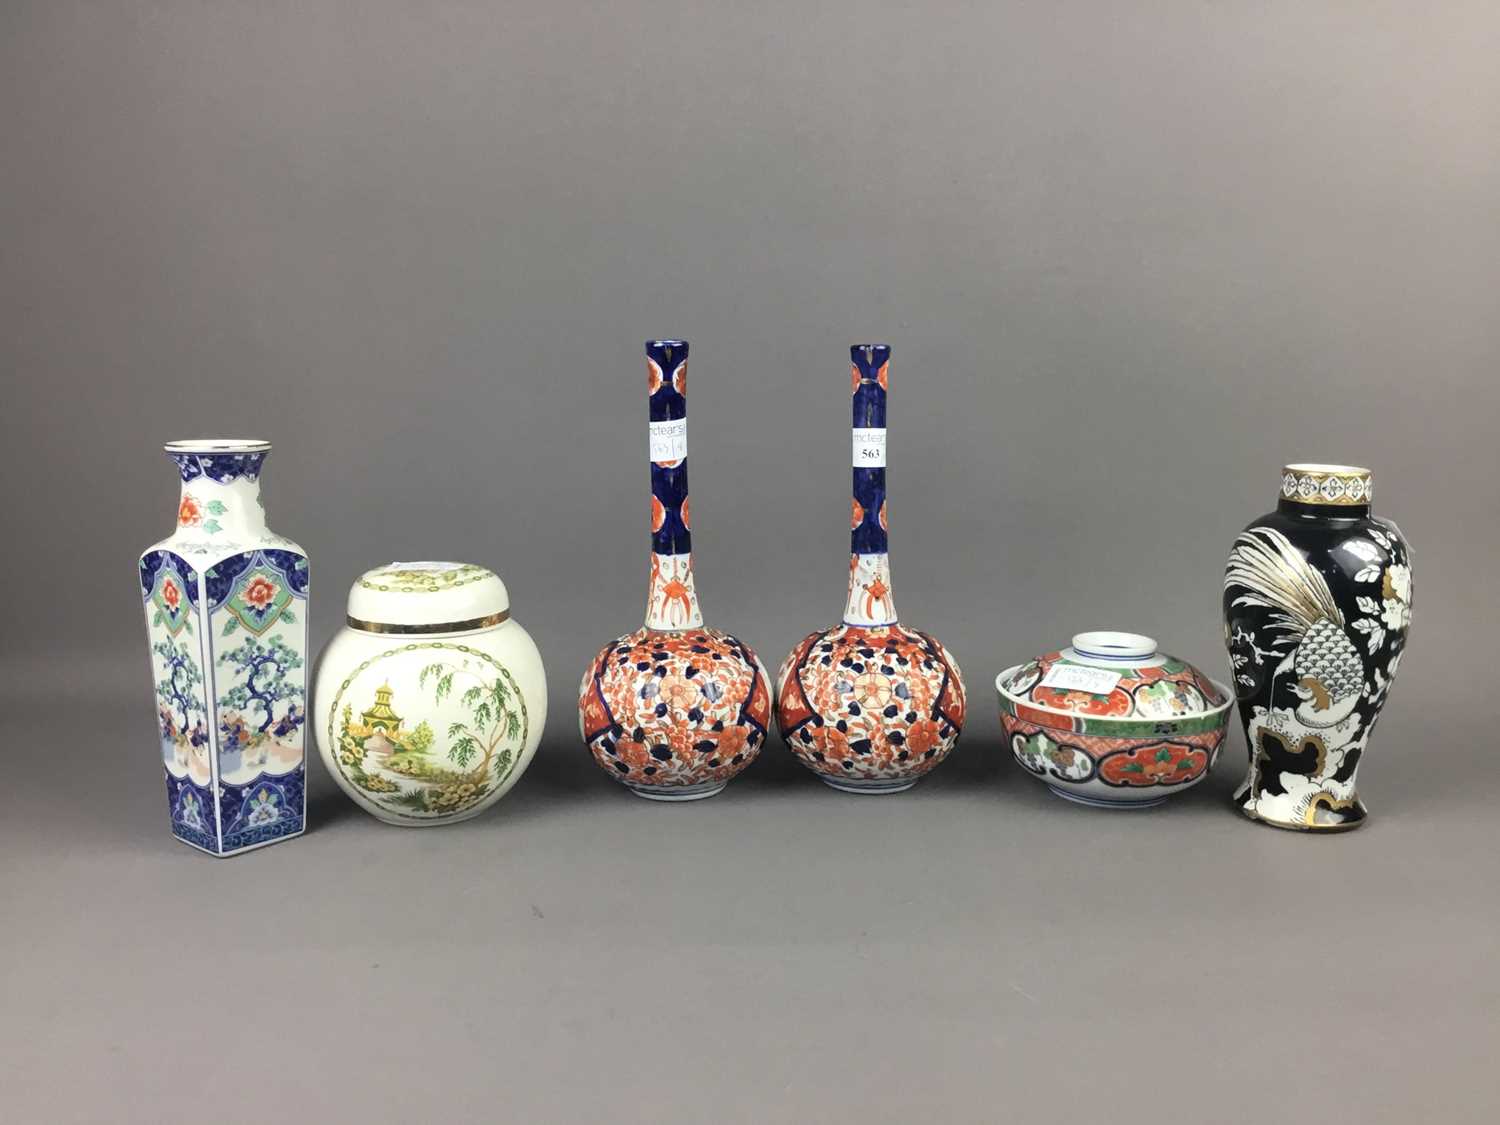 A PAIR OF IMARI GOURD SHAPED VASES, THREE GINGER JARS AND OTHER CERAMICS